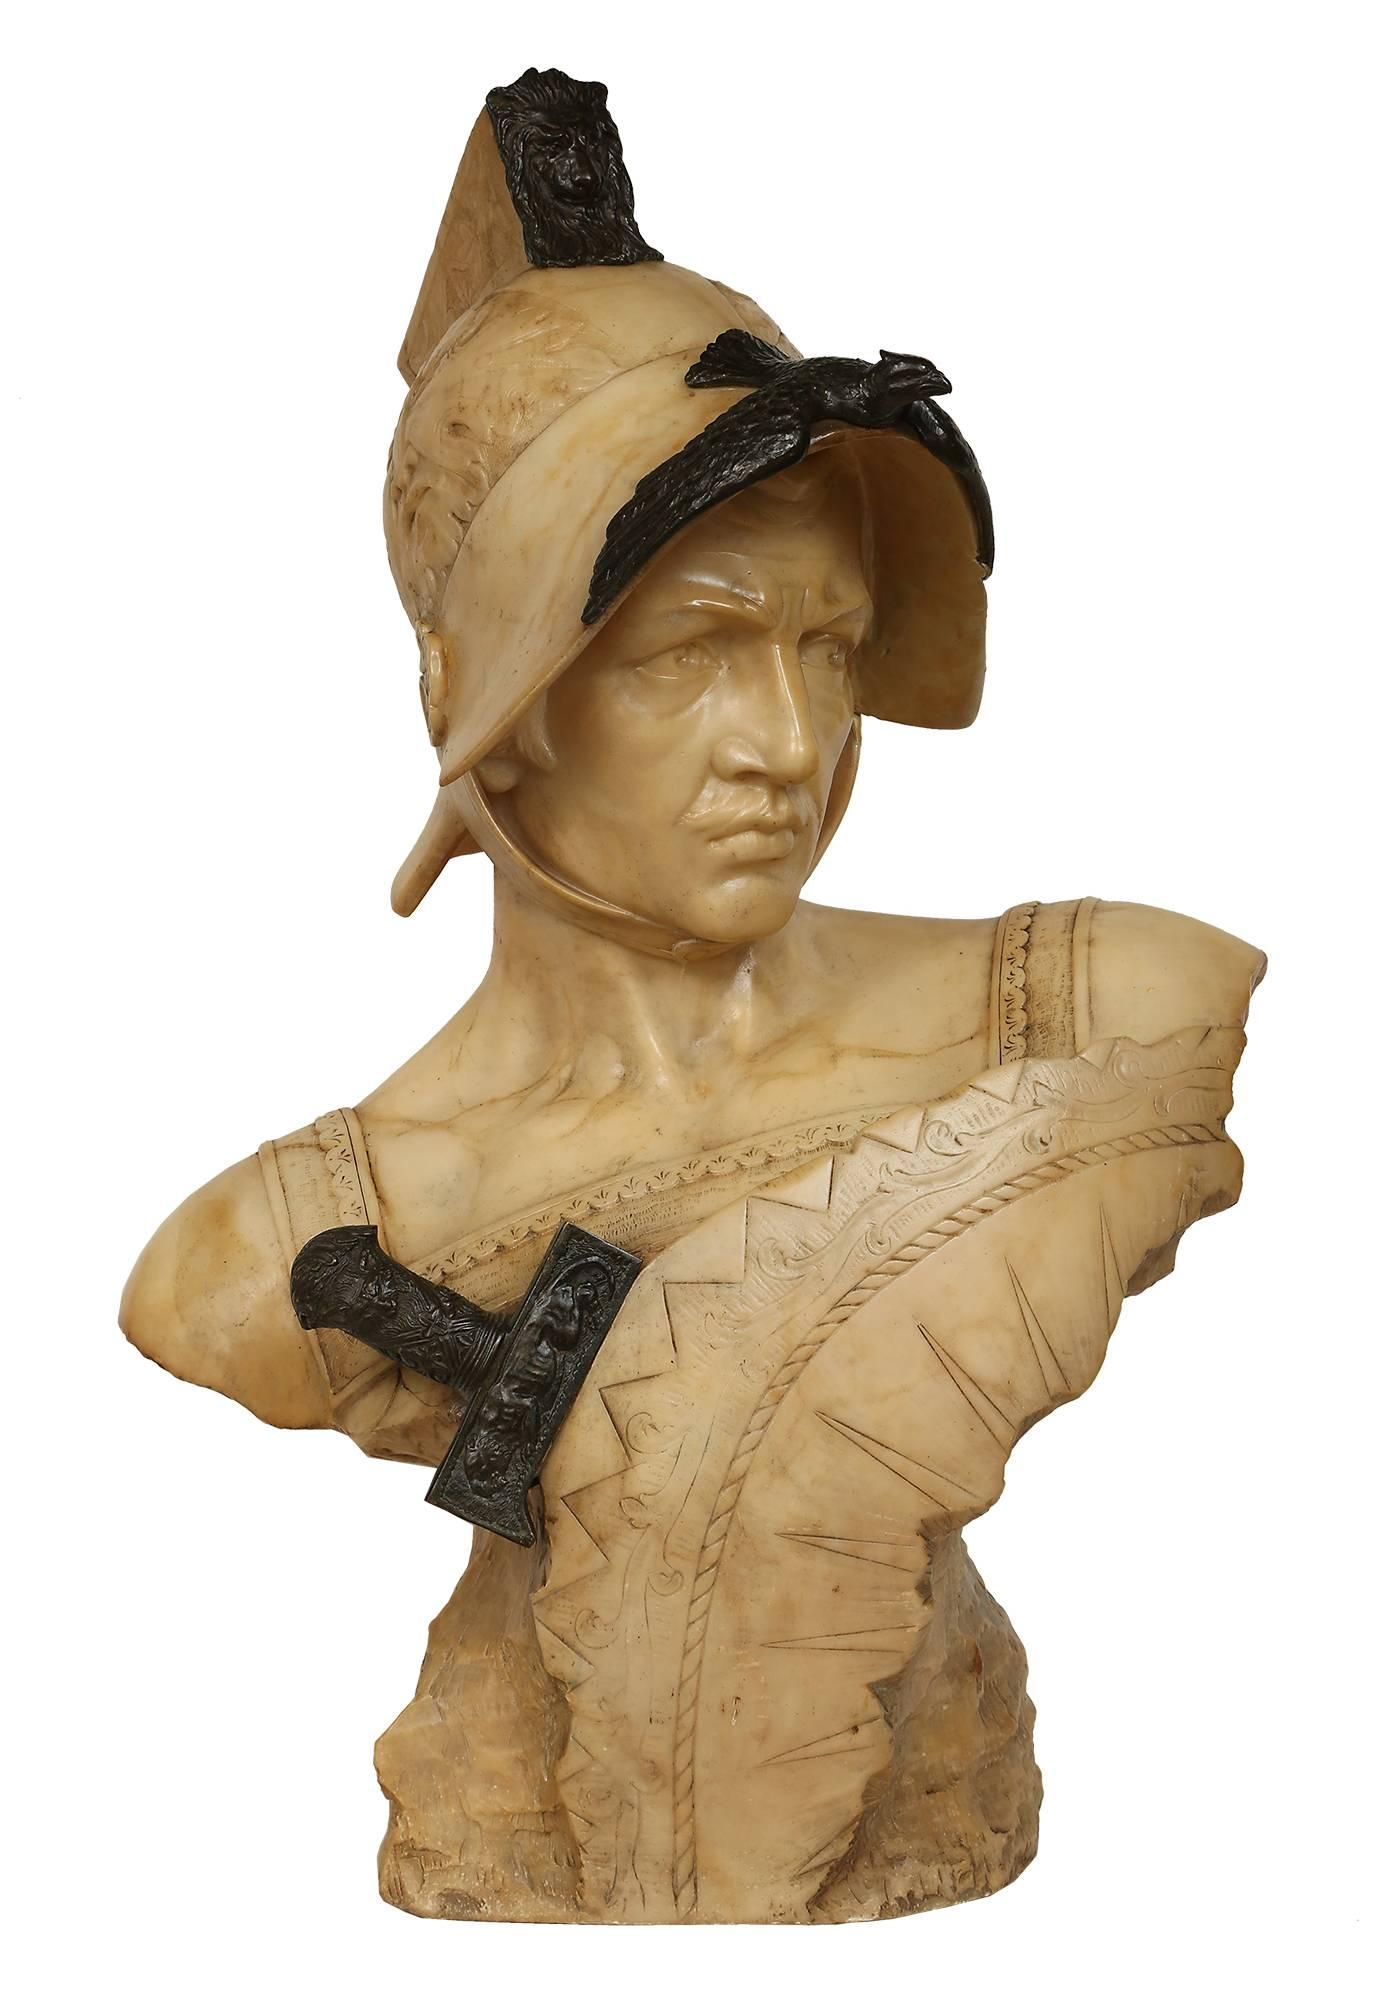 A sensational and extremely well executed Italian 19th century Carrara marble and bronze statue of a Roman soldier. The unique bust displays handsome raw chiseled sides and back while at the front is part of an impressive shield with carved details,